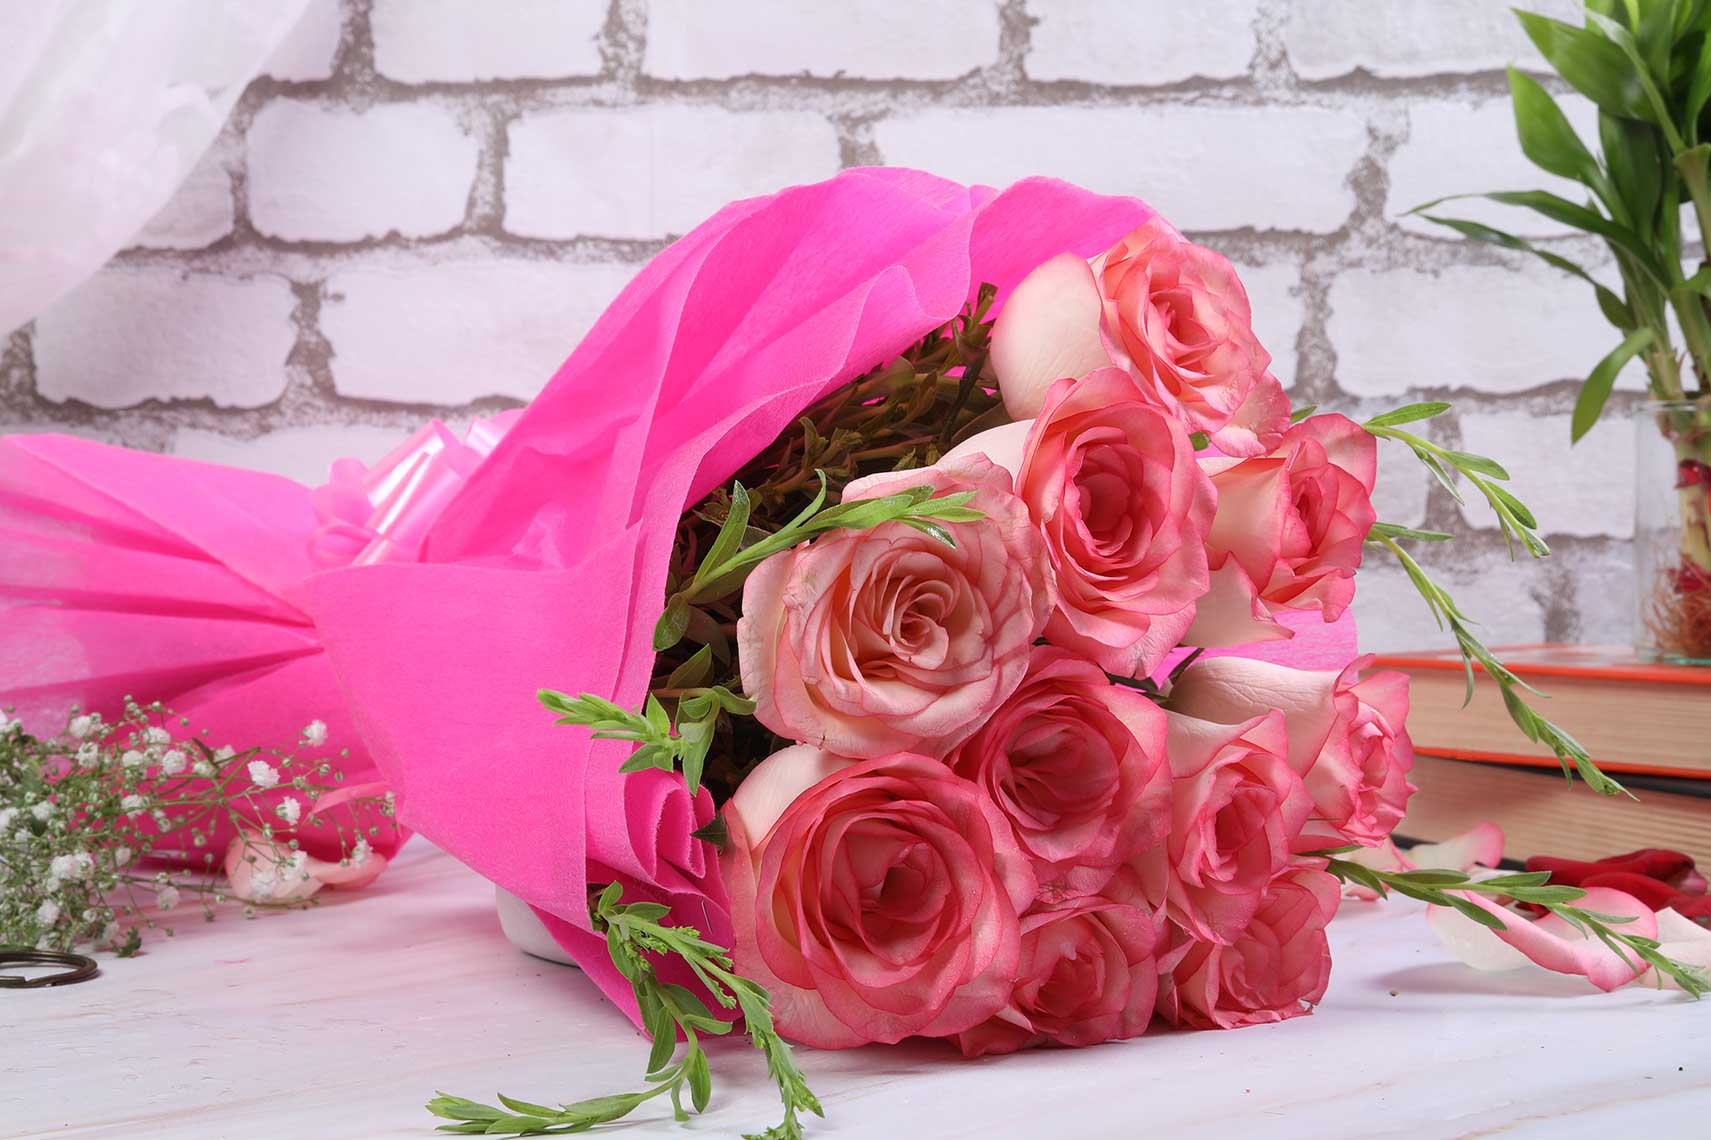 Bouquet of 12 Pink Roses